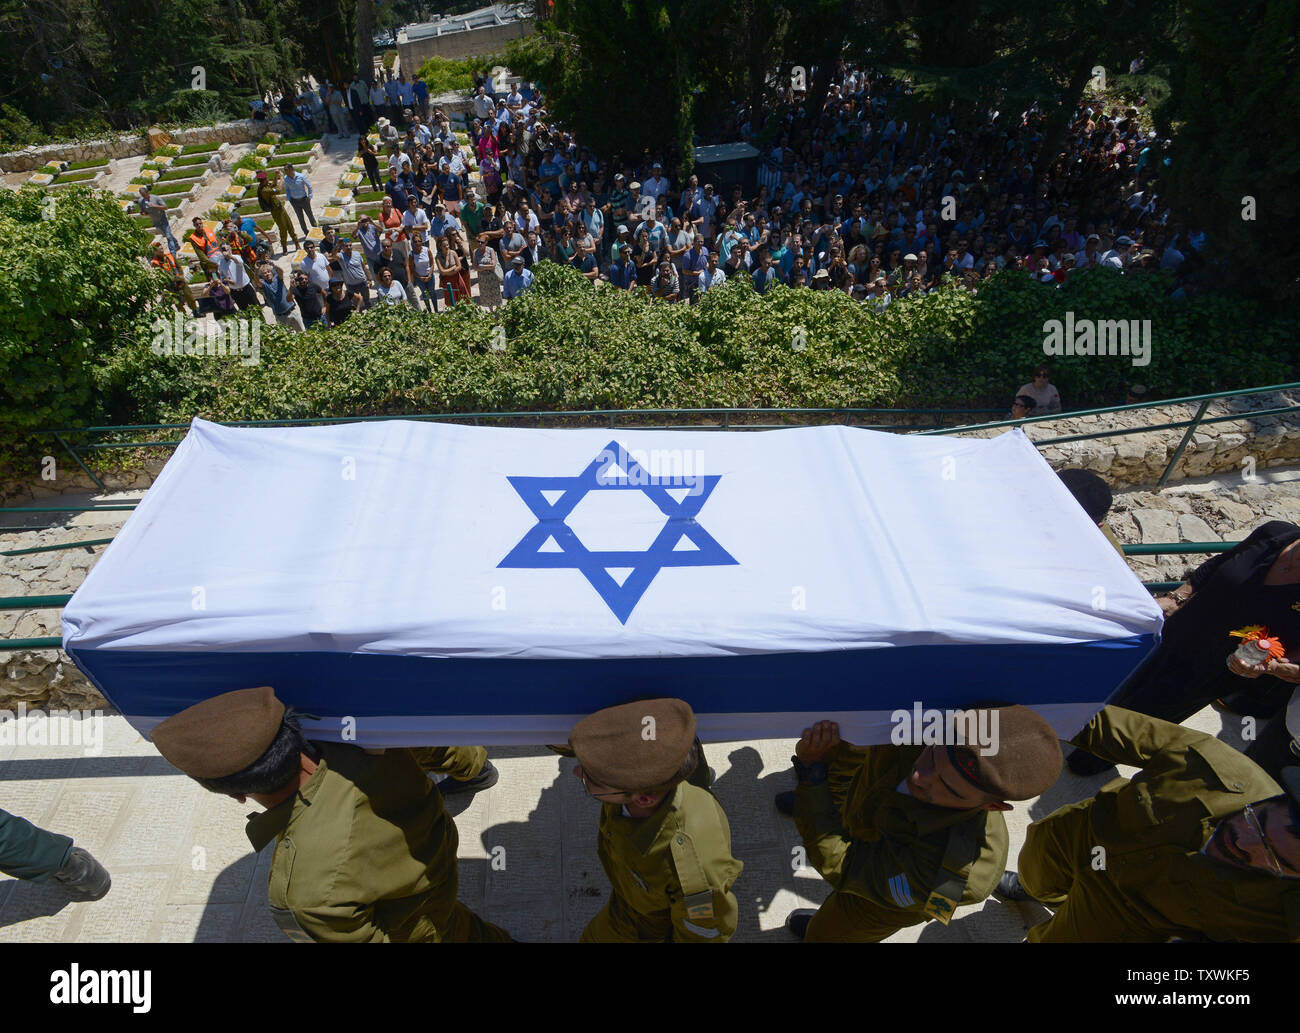 Israeli soldiers carry the flag covered coffin of American-Israeli soldier Max Steinberg, 24, at his funeral in the military cemetery on Mt. Herzl in Jerusalem, Israel, July 23, 2014.  Steinberg, a native of Los Angeles, California, immigrated to Israel and enlisted in the Israel Defense Forces in 2012, where he served as a sharpshooter in the elite Golani Brigade. He was among the 13 soldiers killed by Palestinian militants in the Gaza Strip on Sunday. Twenty-nine Israeli troops have been killed since the army launched a ground incursion into Gaza last week. More than 30,000 people attended t Stock Photo